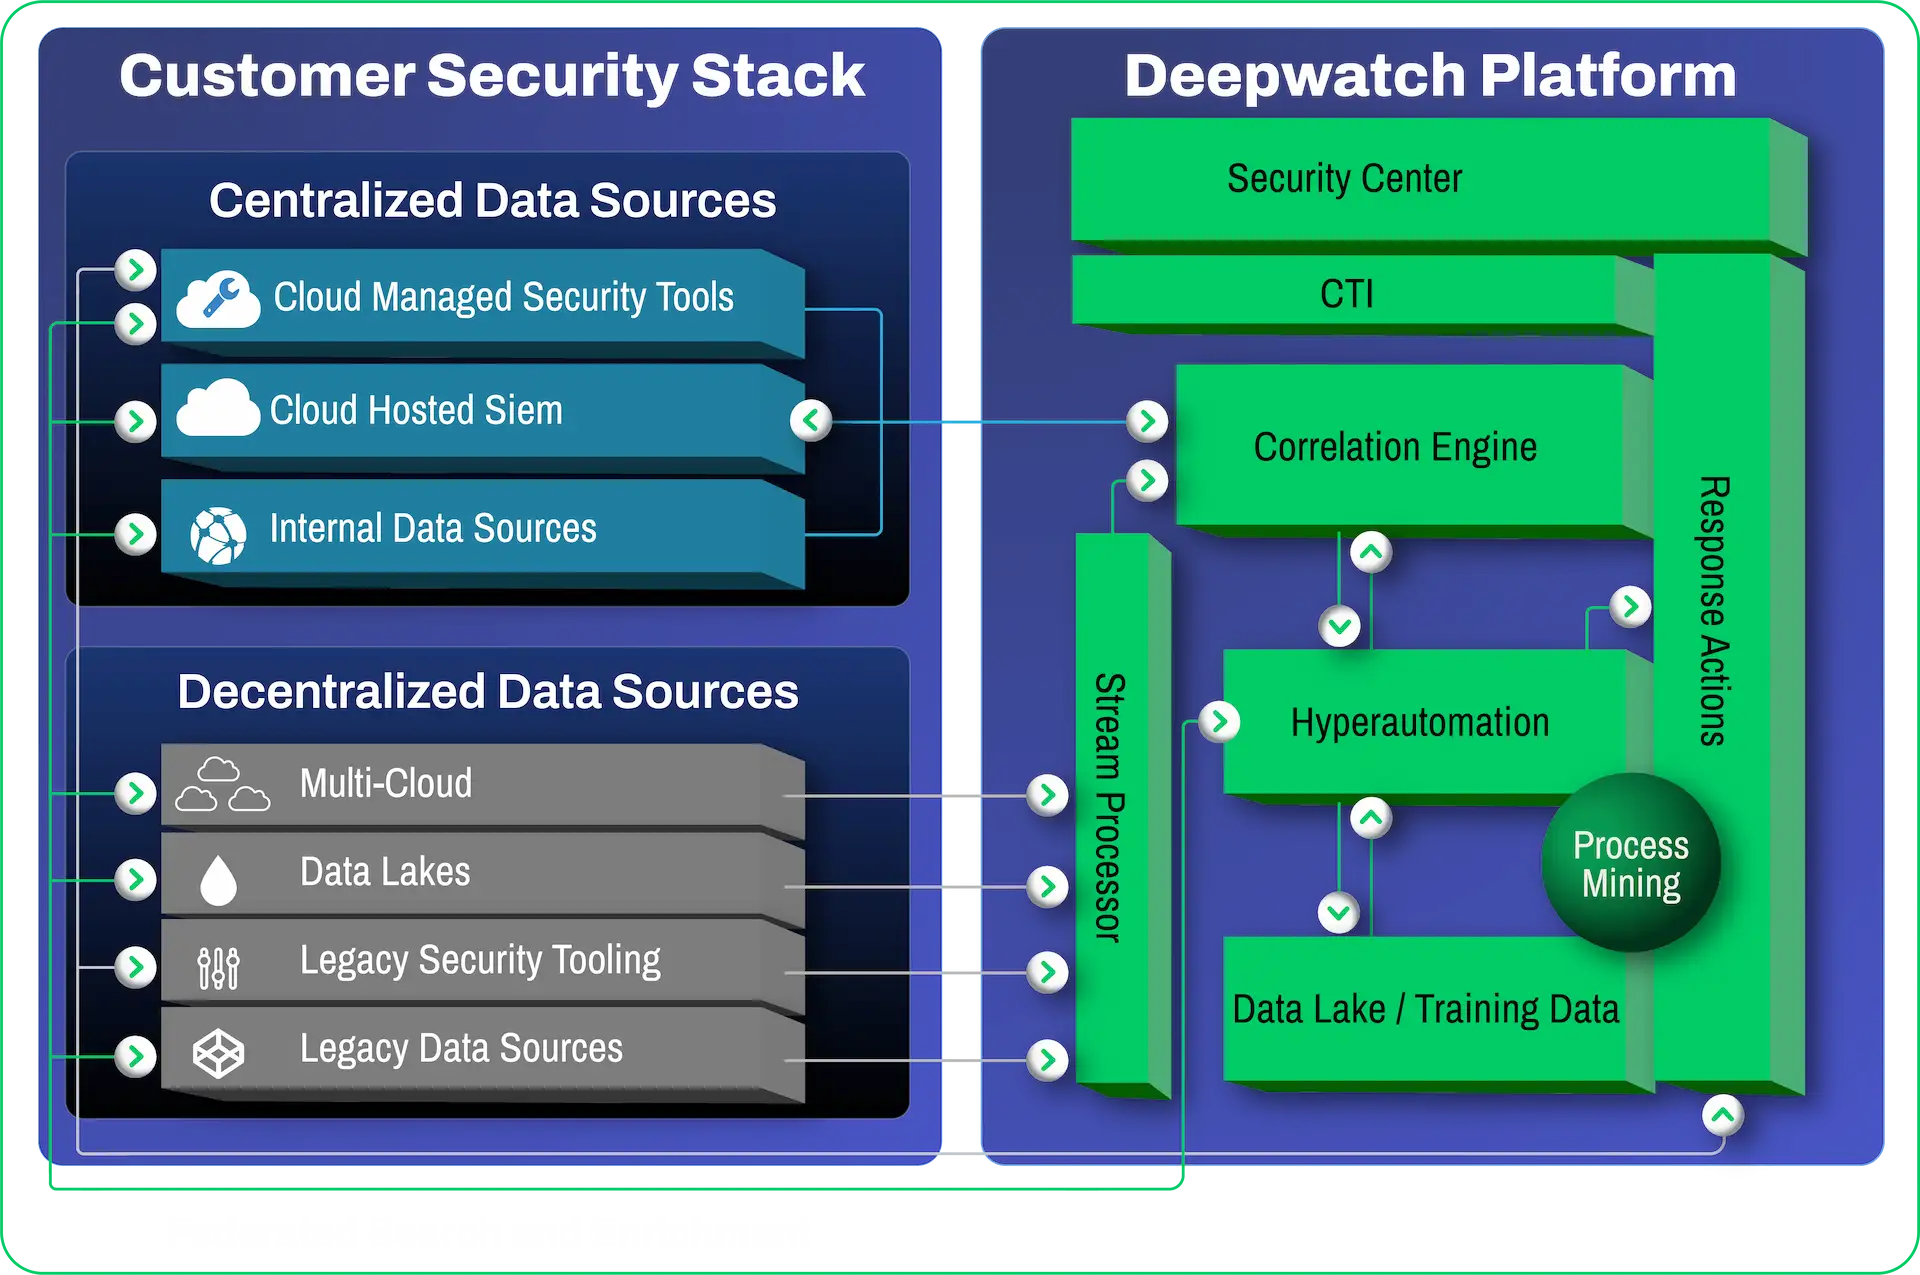 A graphic showing centralized and decentralized data sources of a customer's security stack and how it ties into the Deepwatch Platform